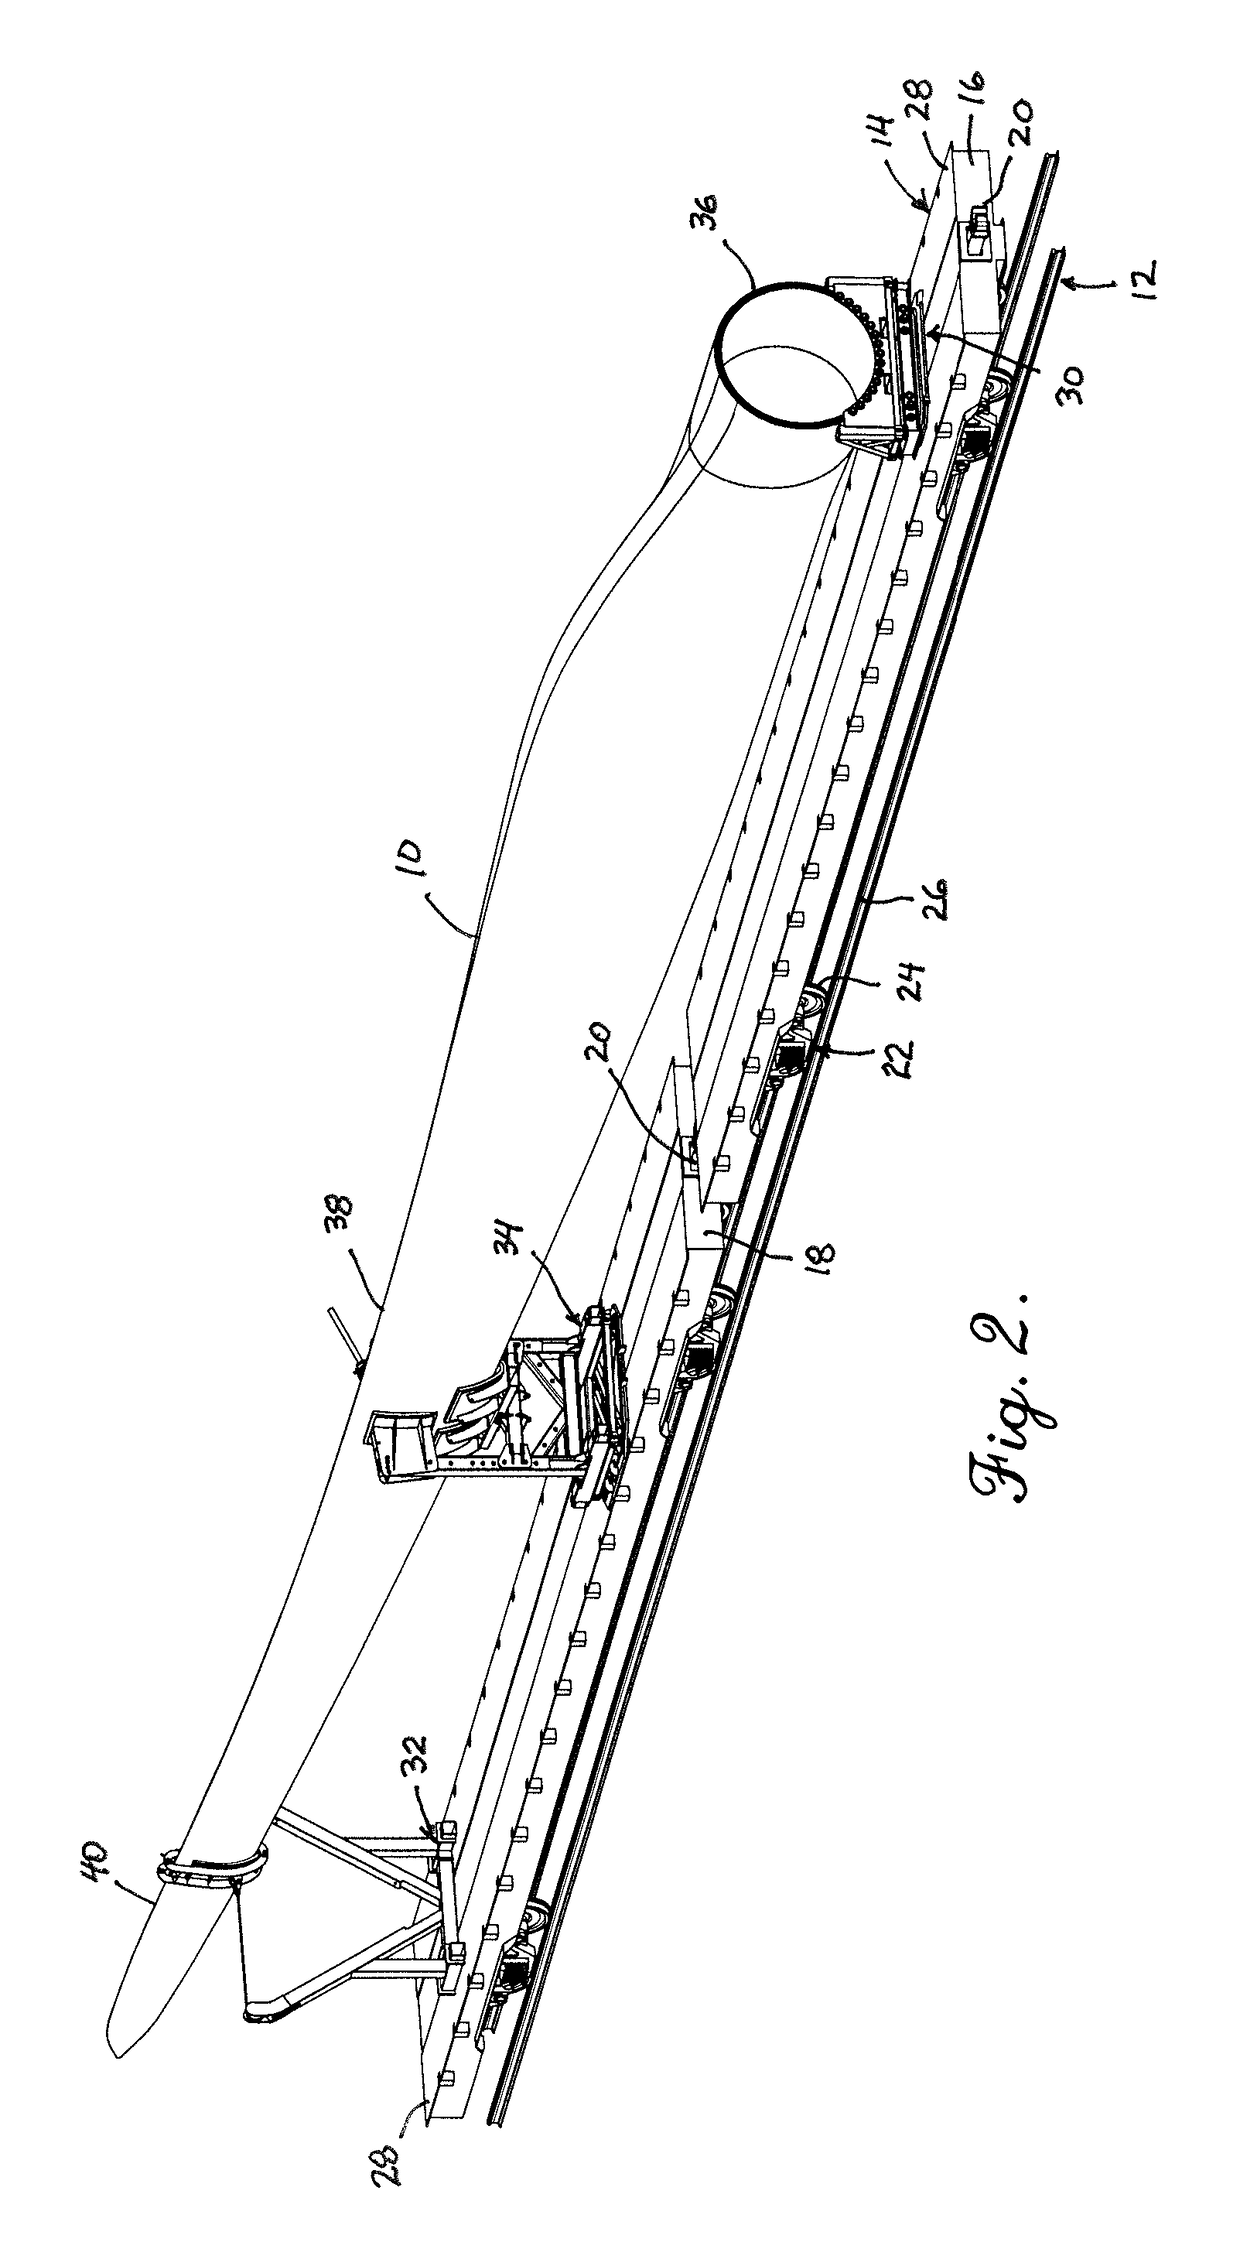 Railcar fixtures for transportation of wind turbine blades and method involving same